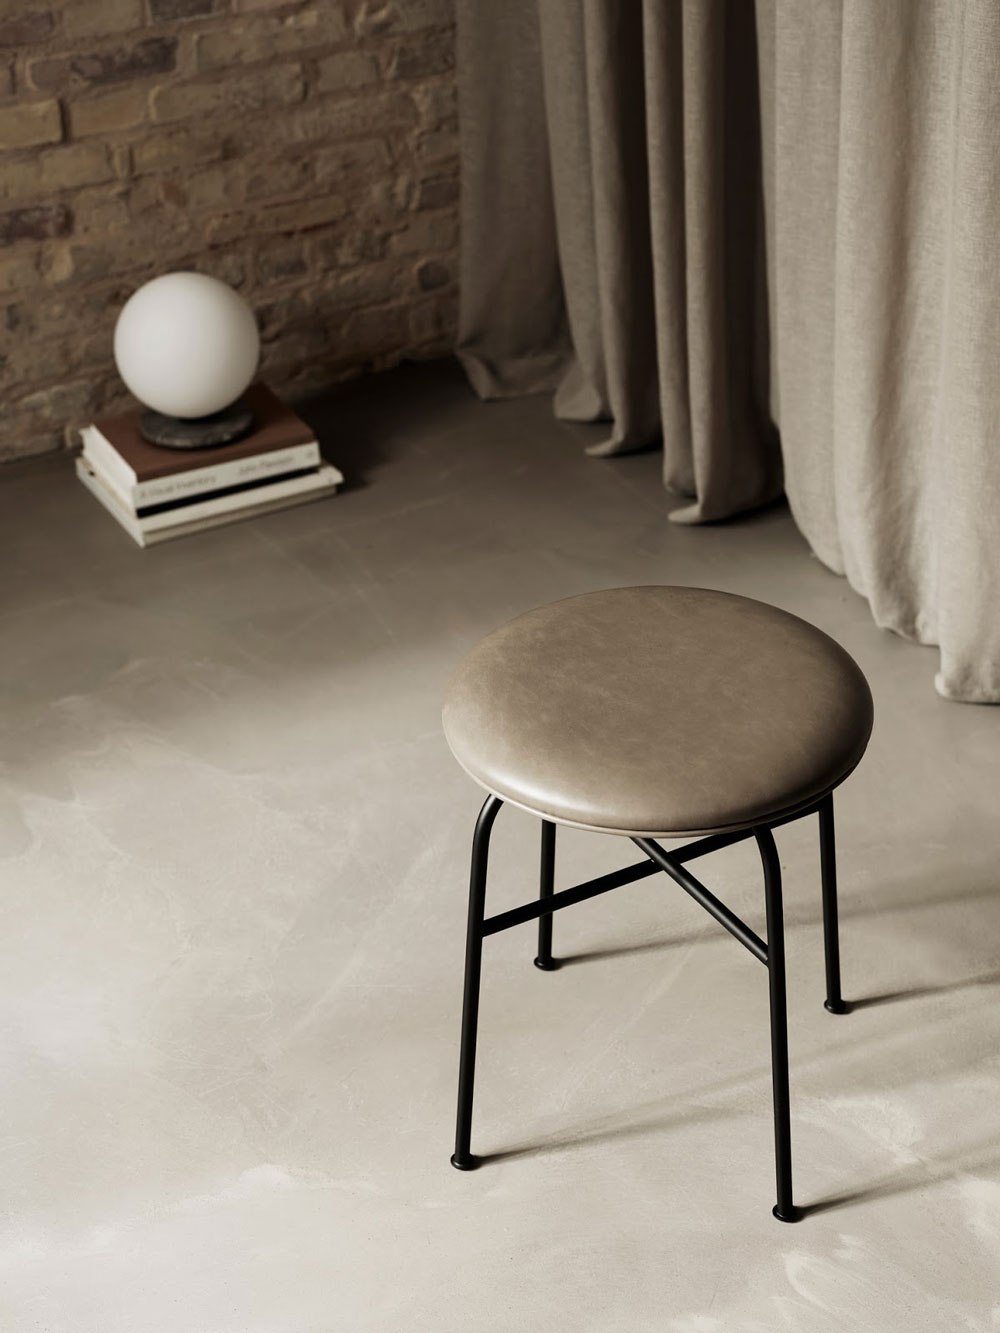 TR Bulb Designed by Tim Rundle. Stool Designed by Afteroom Menu Furniture, Lighting & Home Accessories